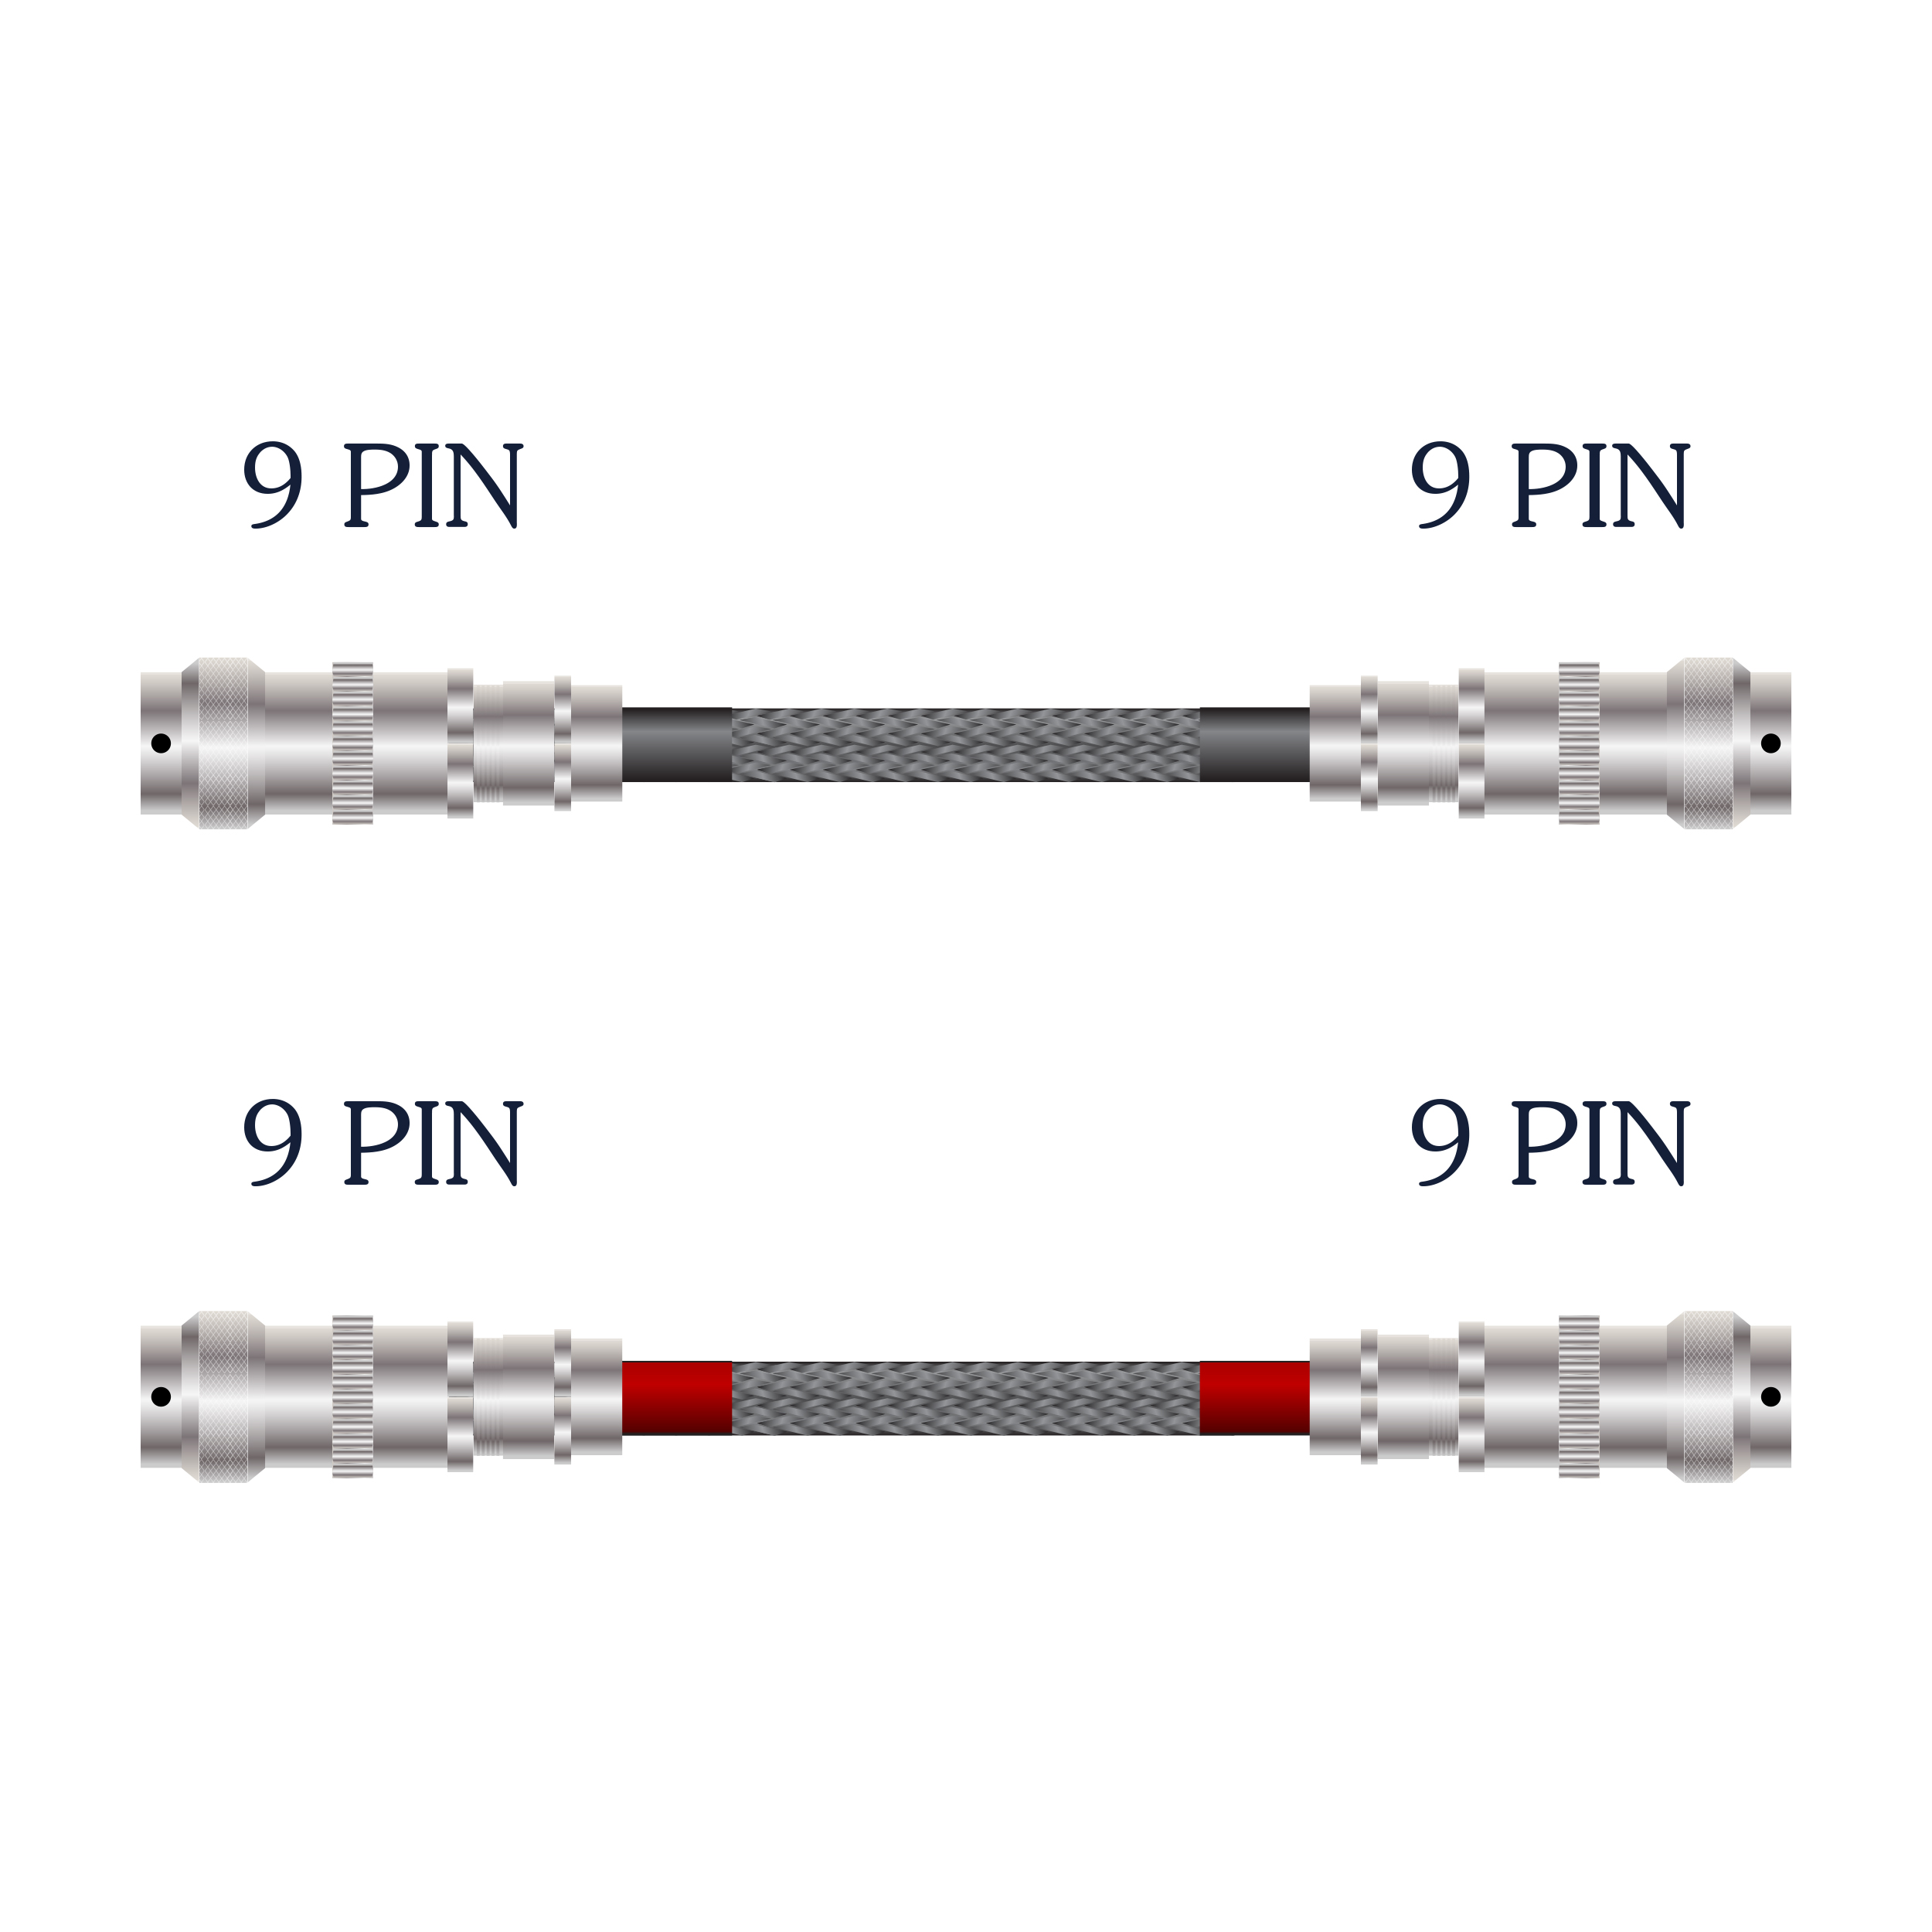 <p align="center">Tyr 2 Specialty 9 Pin / 9 Pin Cable Pair Cable</p>